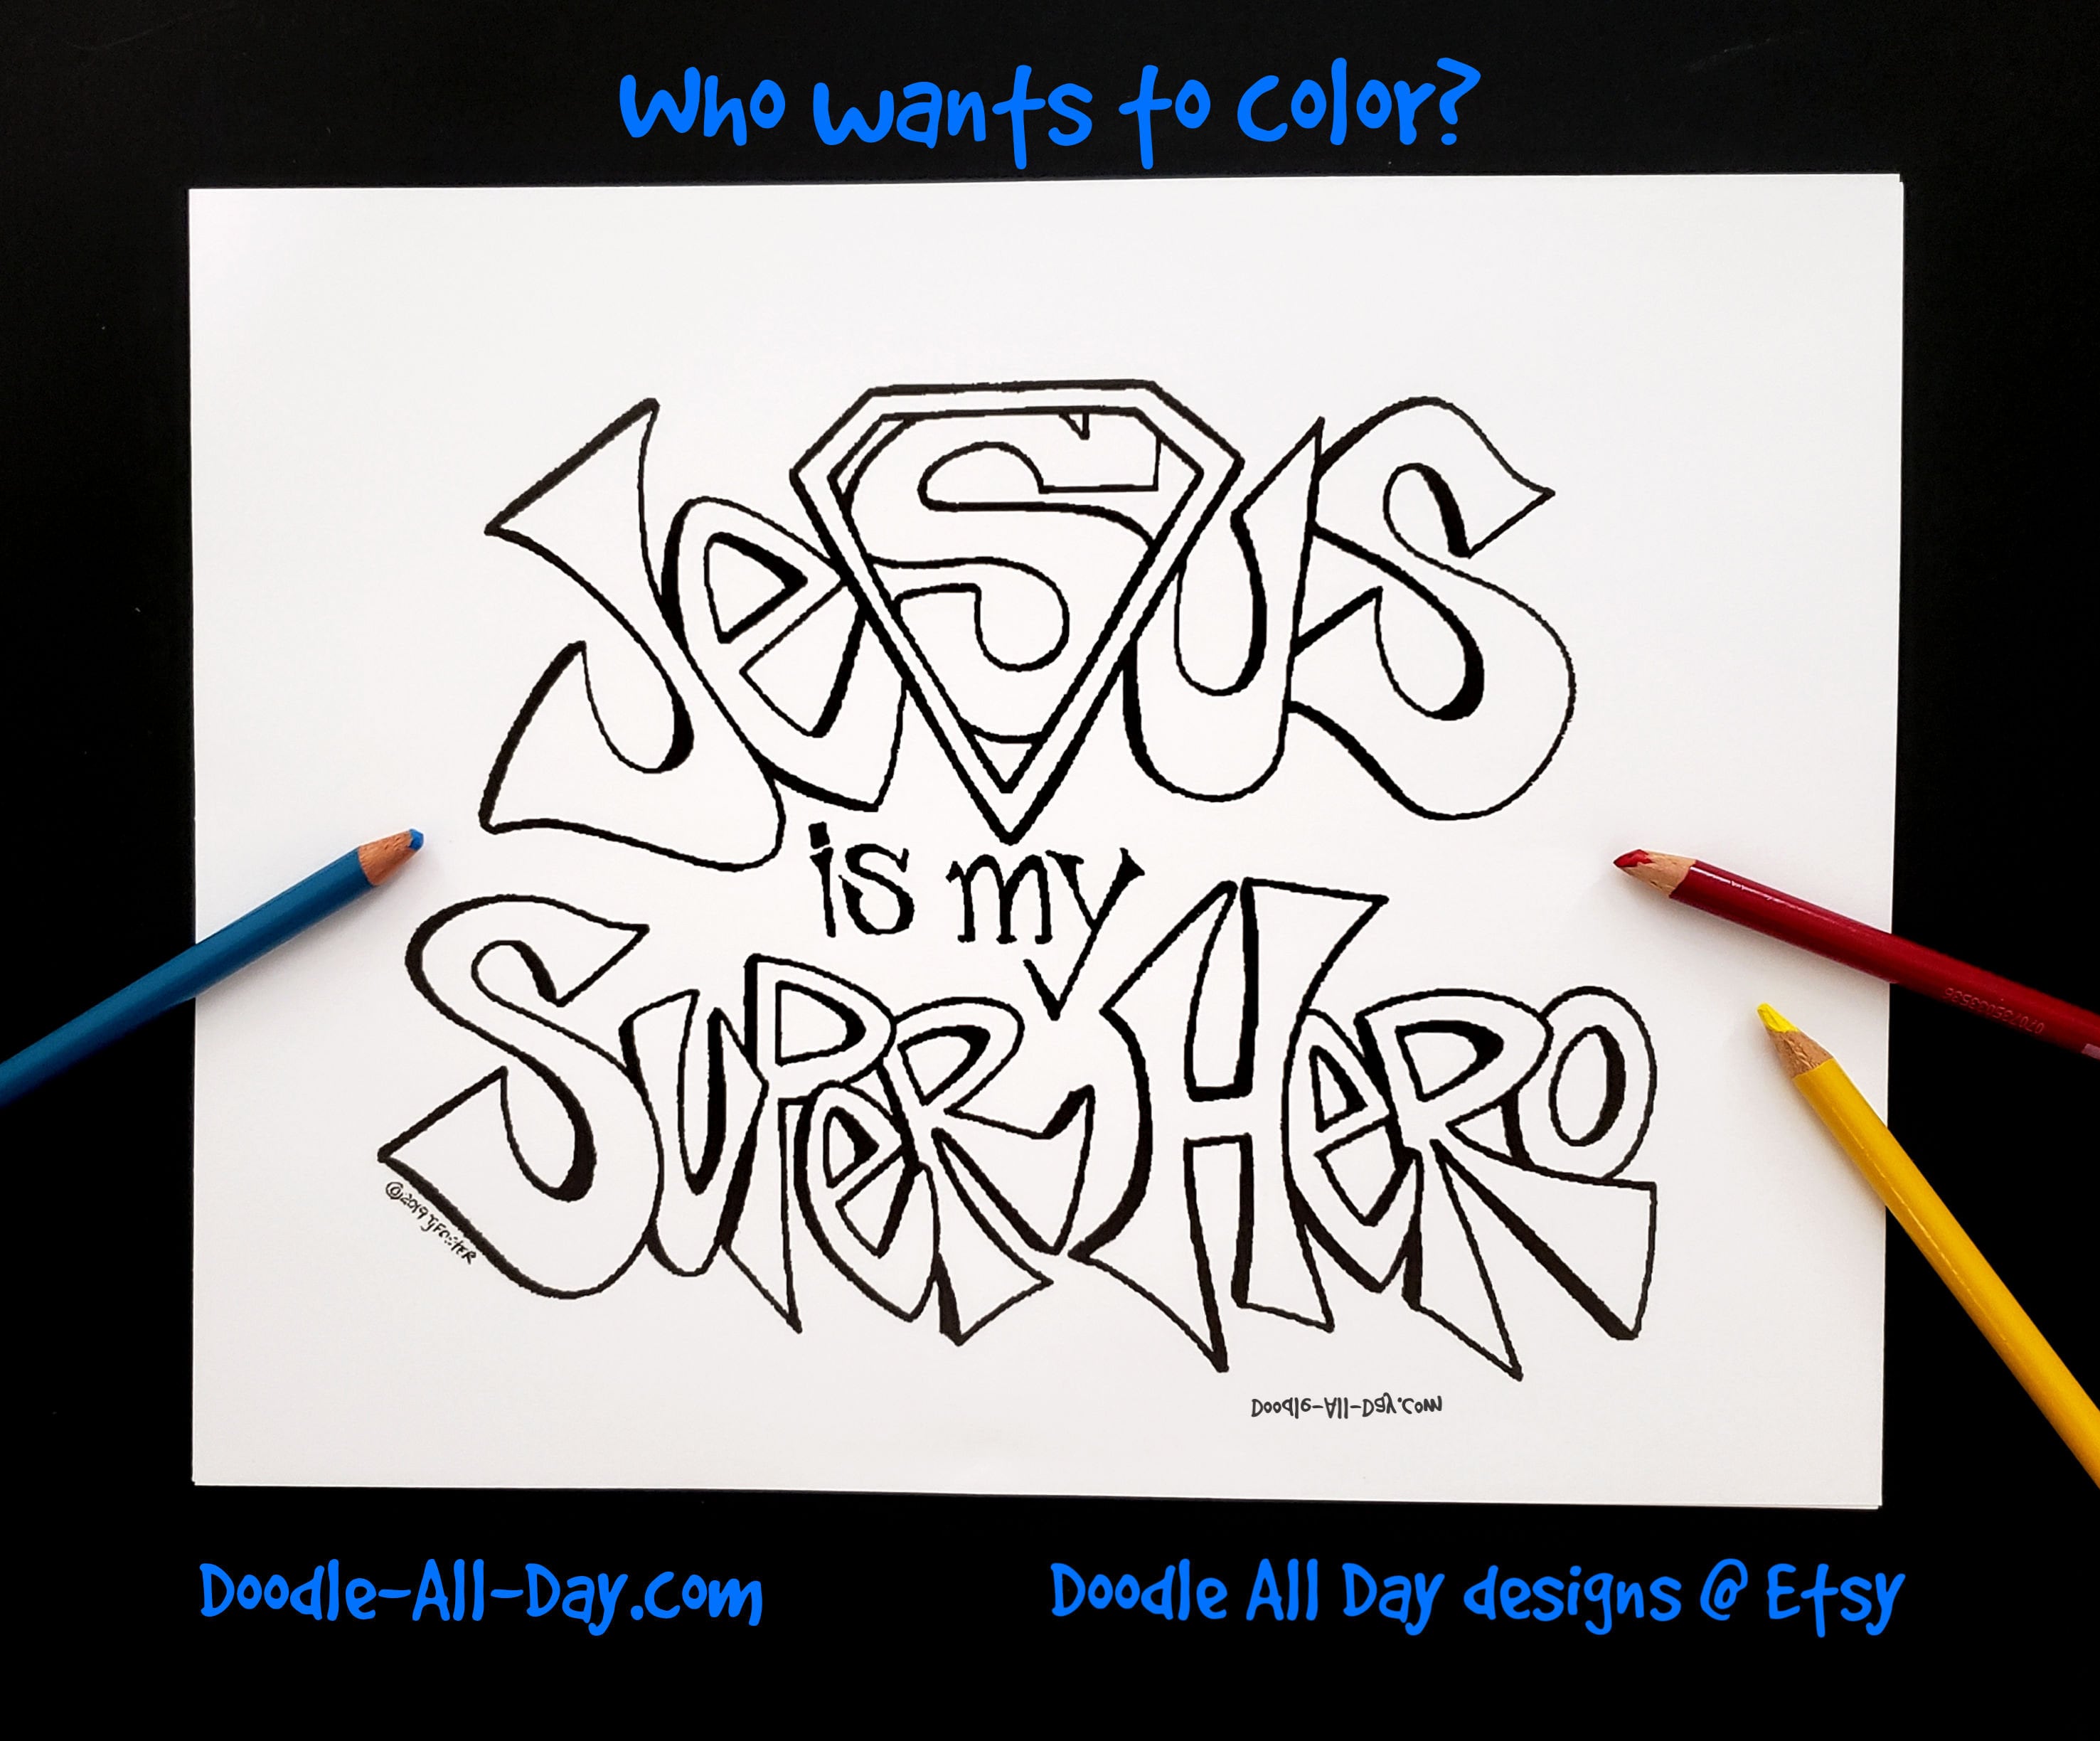 Easy How to Draw a Superhero Tutorial and Superhero Coloring Page